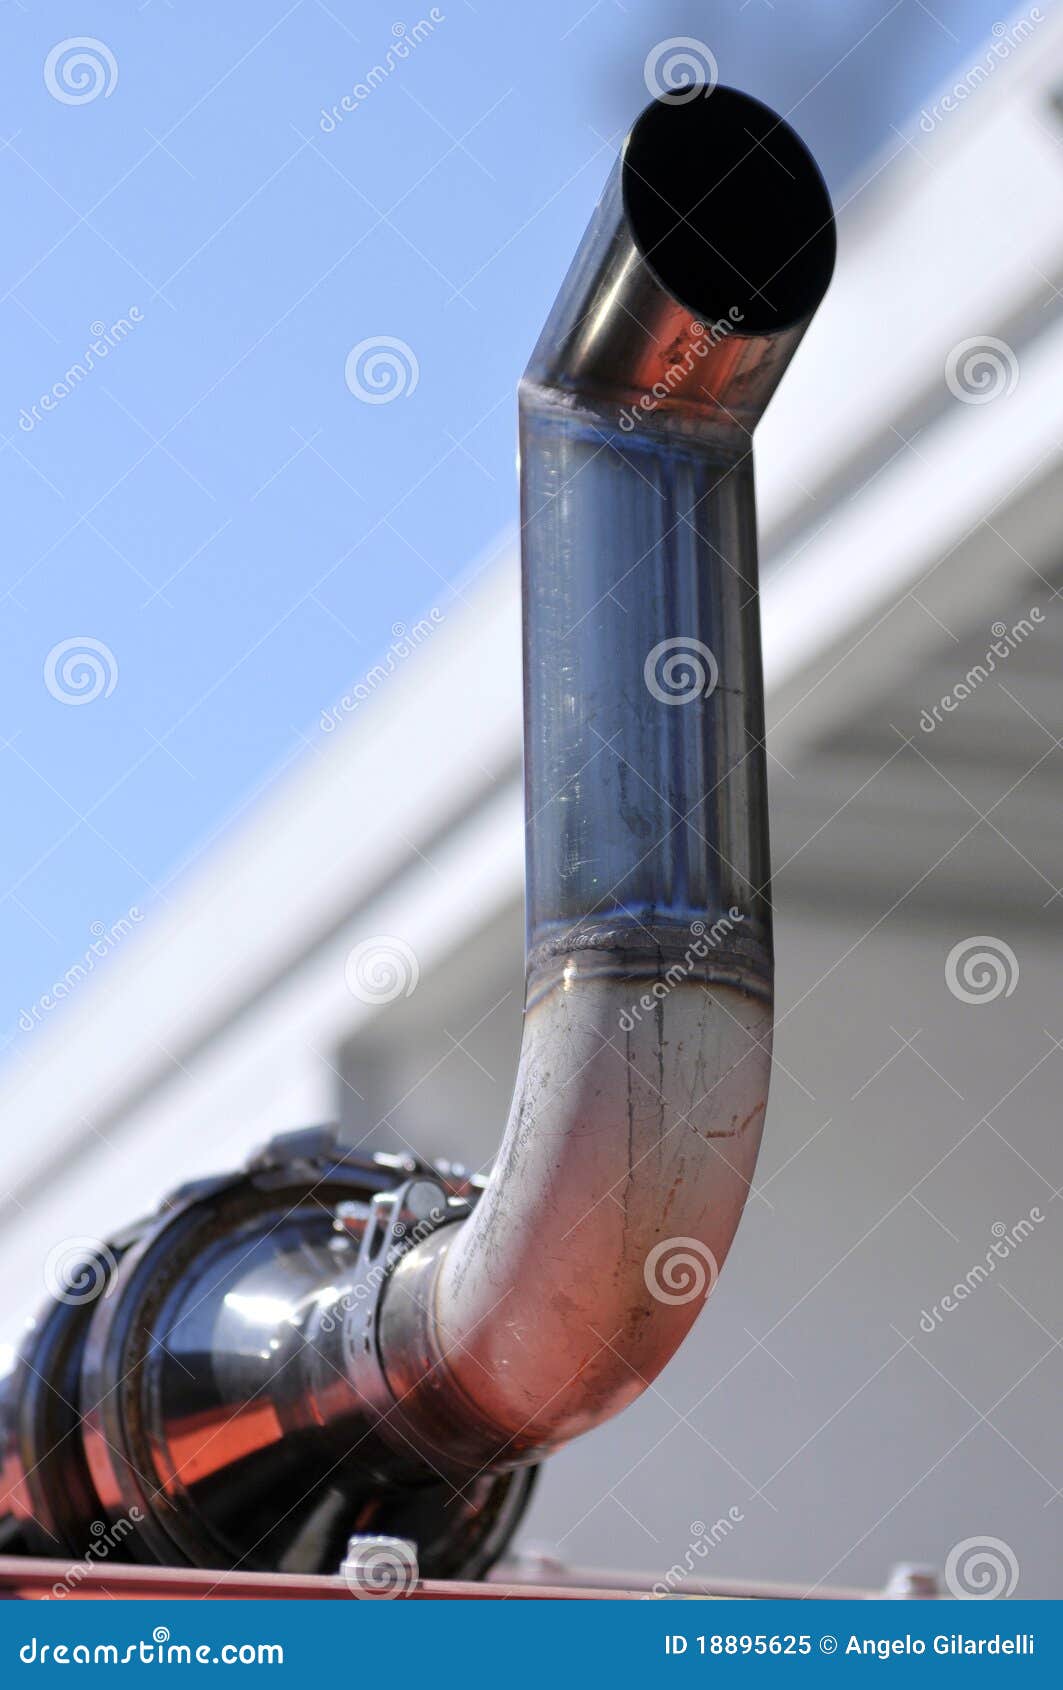 Truck exhaust pipe stock image. Image of smog, pollution - 18895625